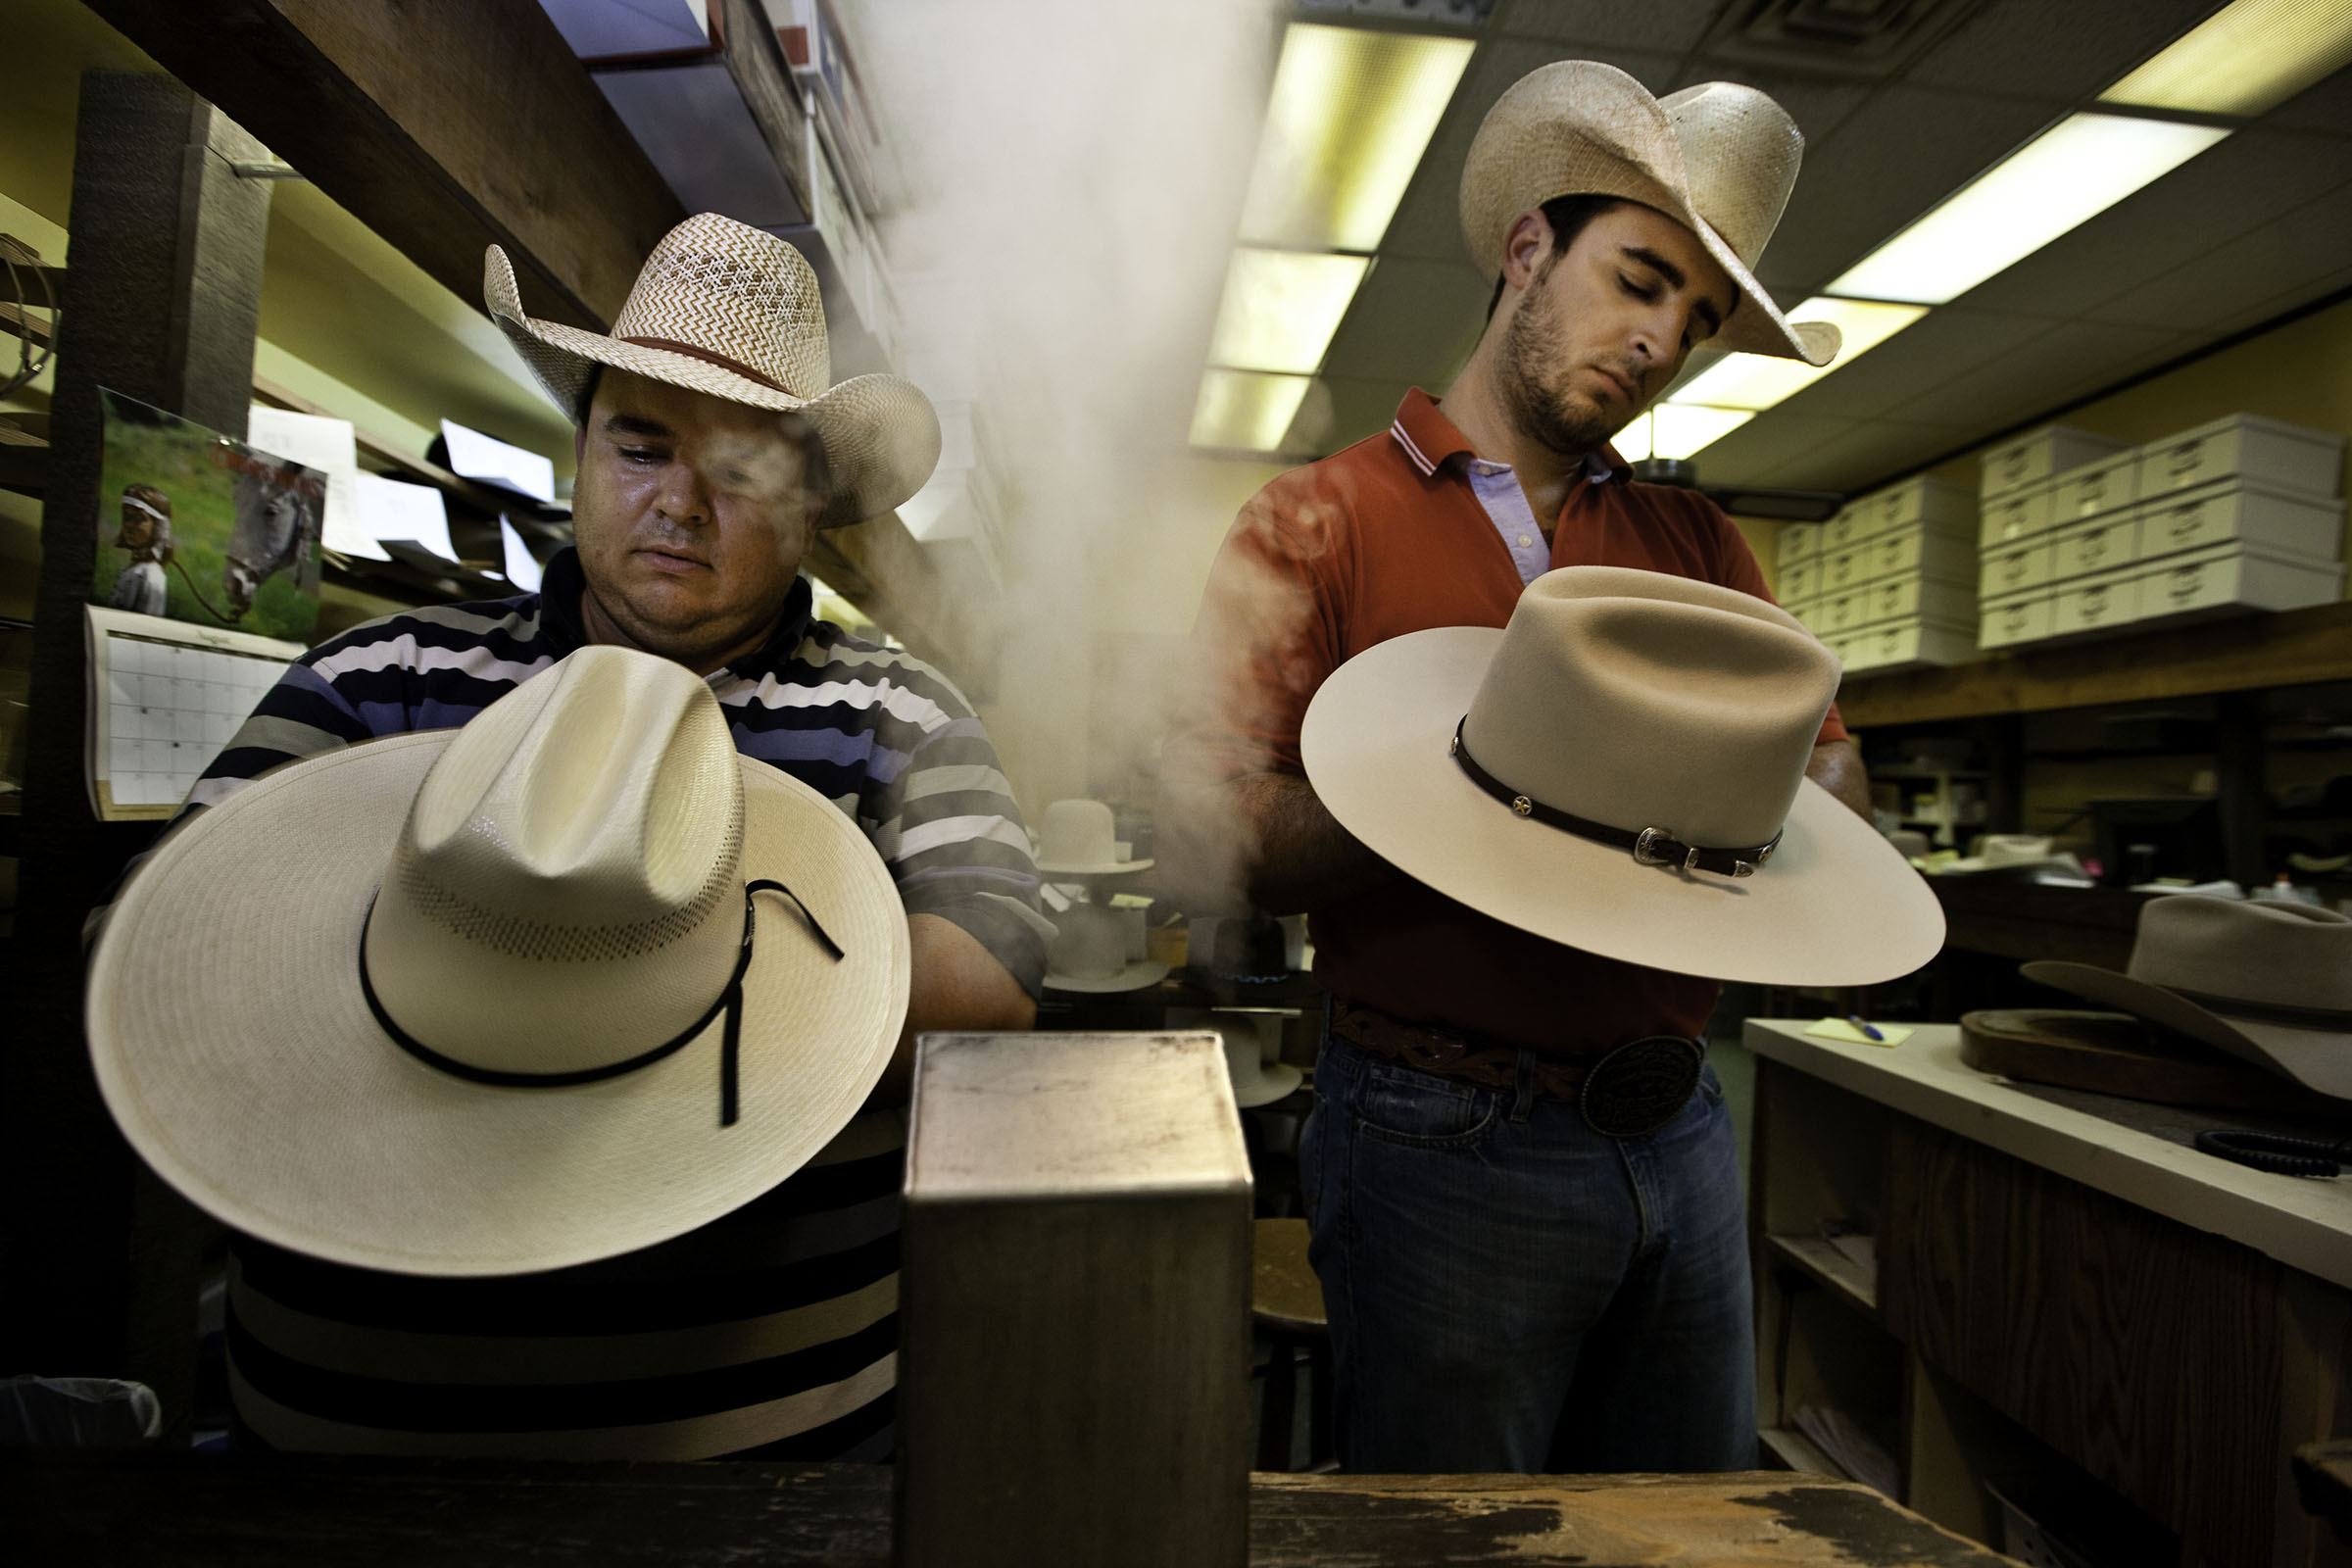 Two men wearing cowboy hats use steam to shape an additional two cowboy hats